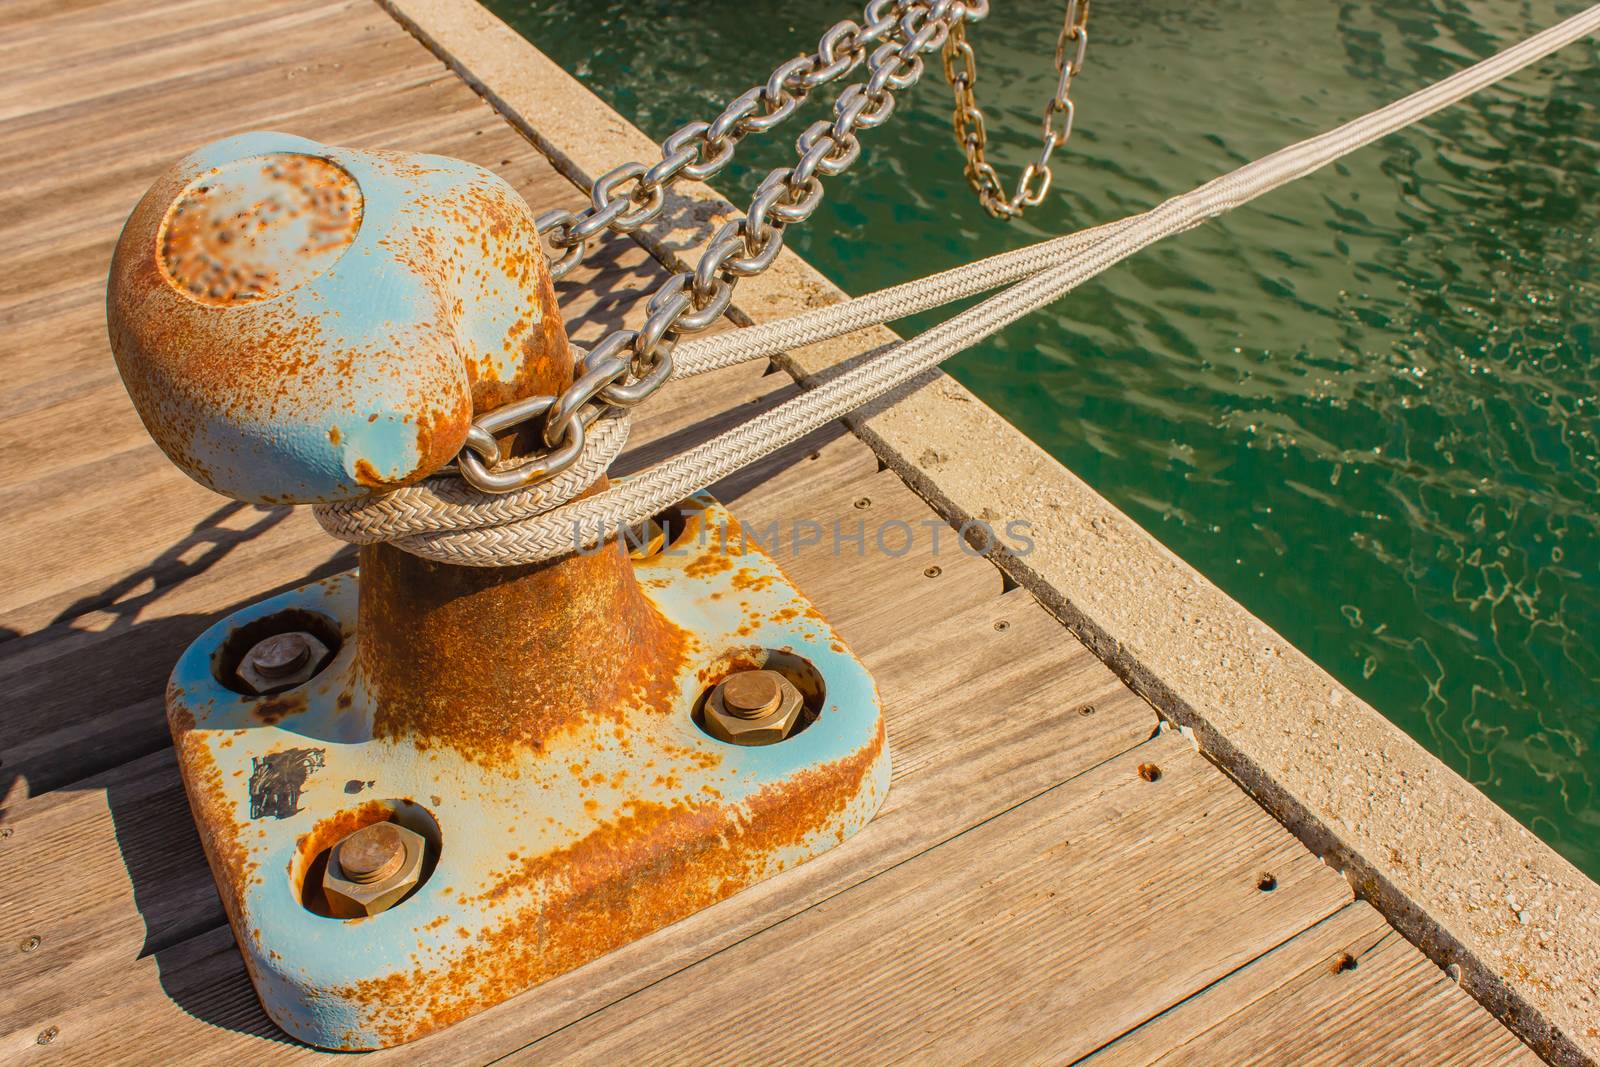 the bitt is a low cast-iron column in the shape of a mushroom to tie chains and mooring ropes